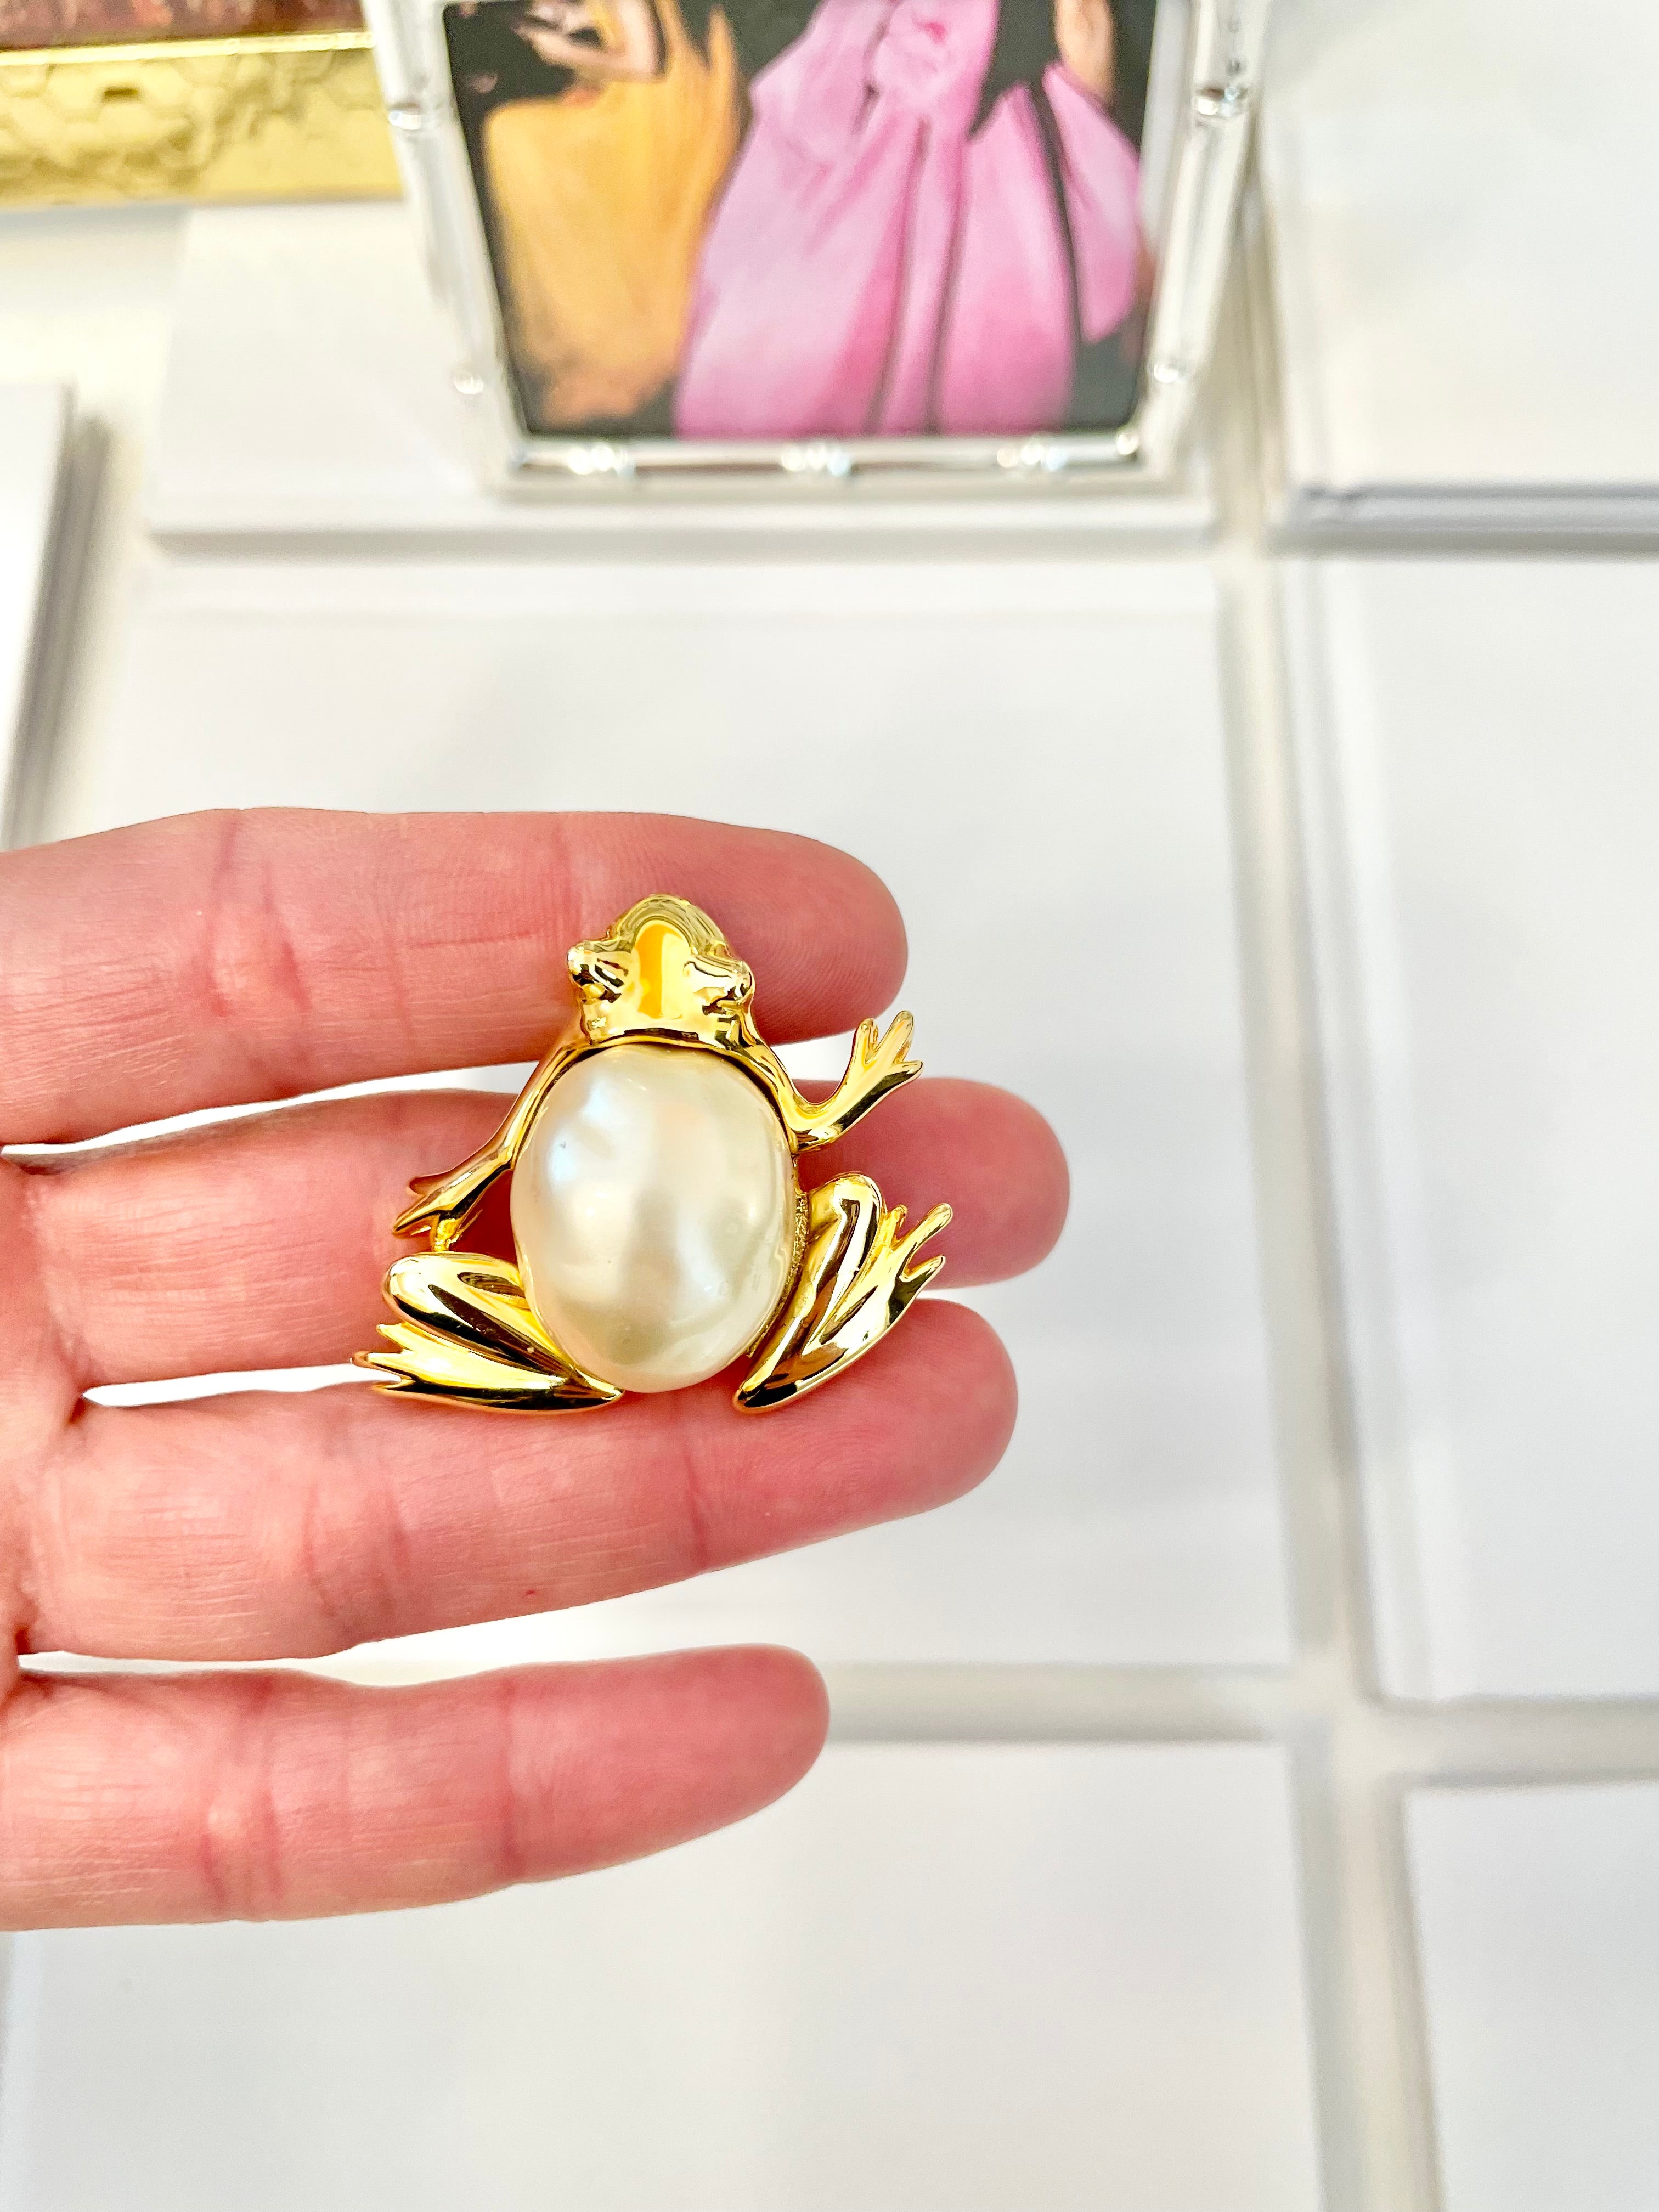 The charming lady loves anything with pearls. This Kenneth Jay lane figural gold brooch is truly divine!